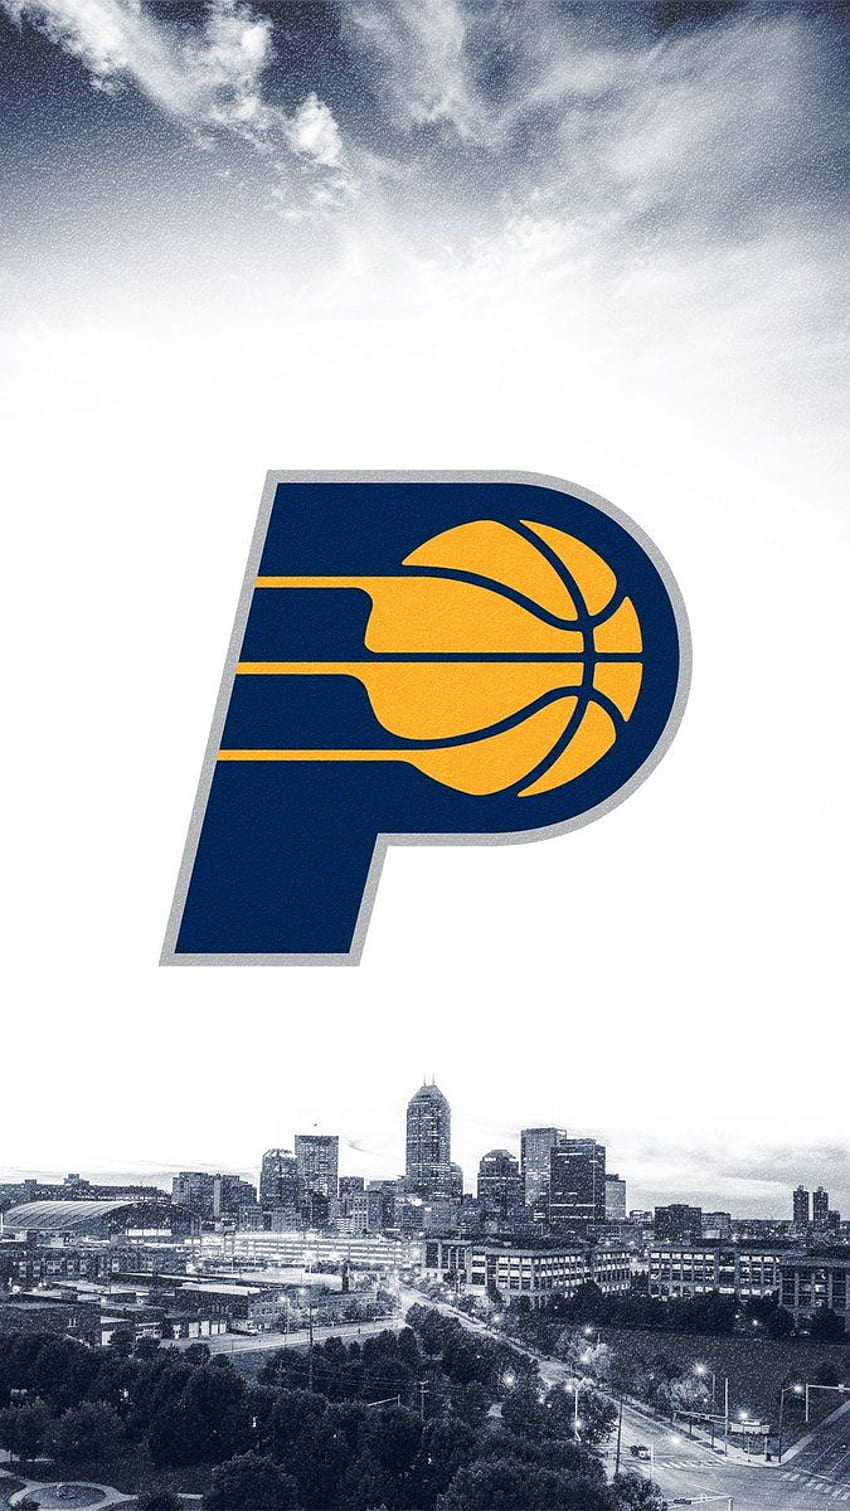 Indiana Pacers Wallpaper by Robert Cooper on Dribbble